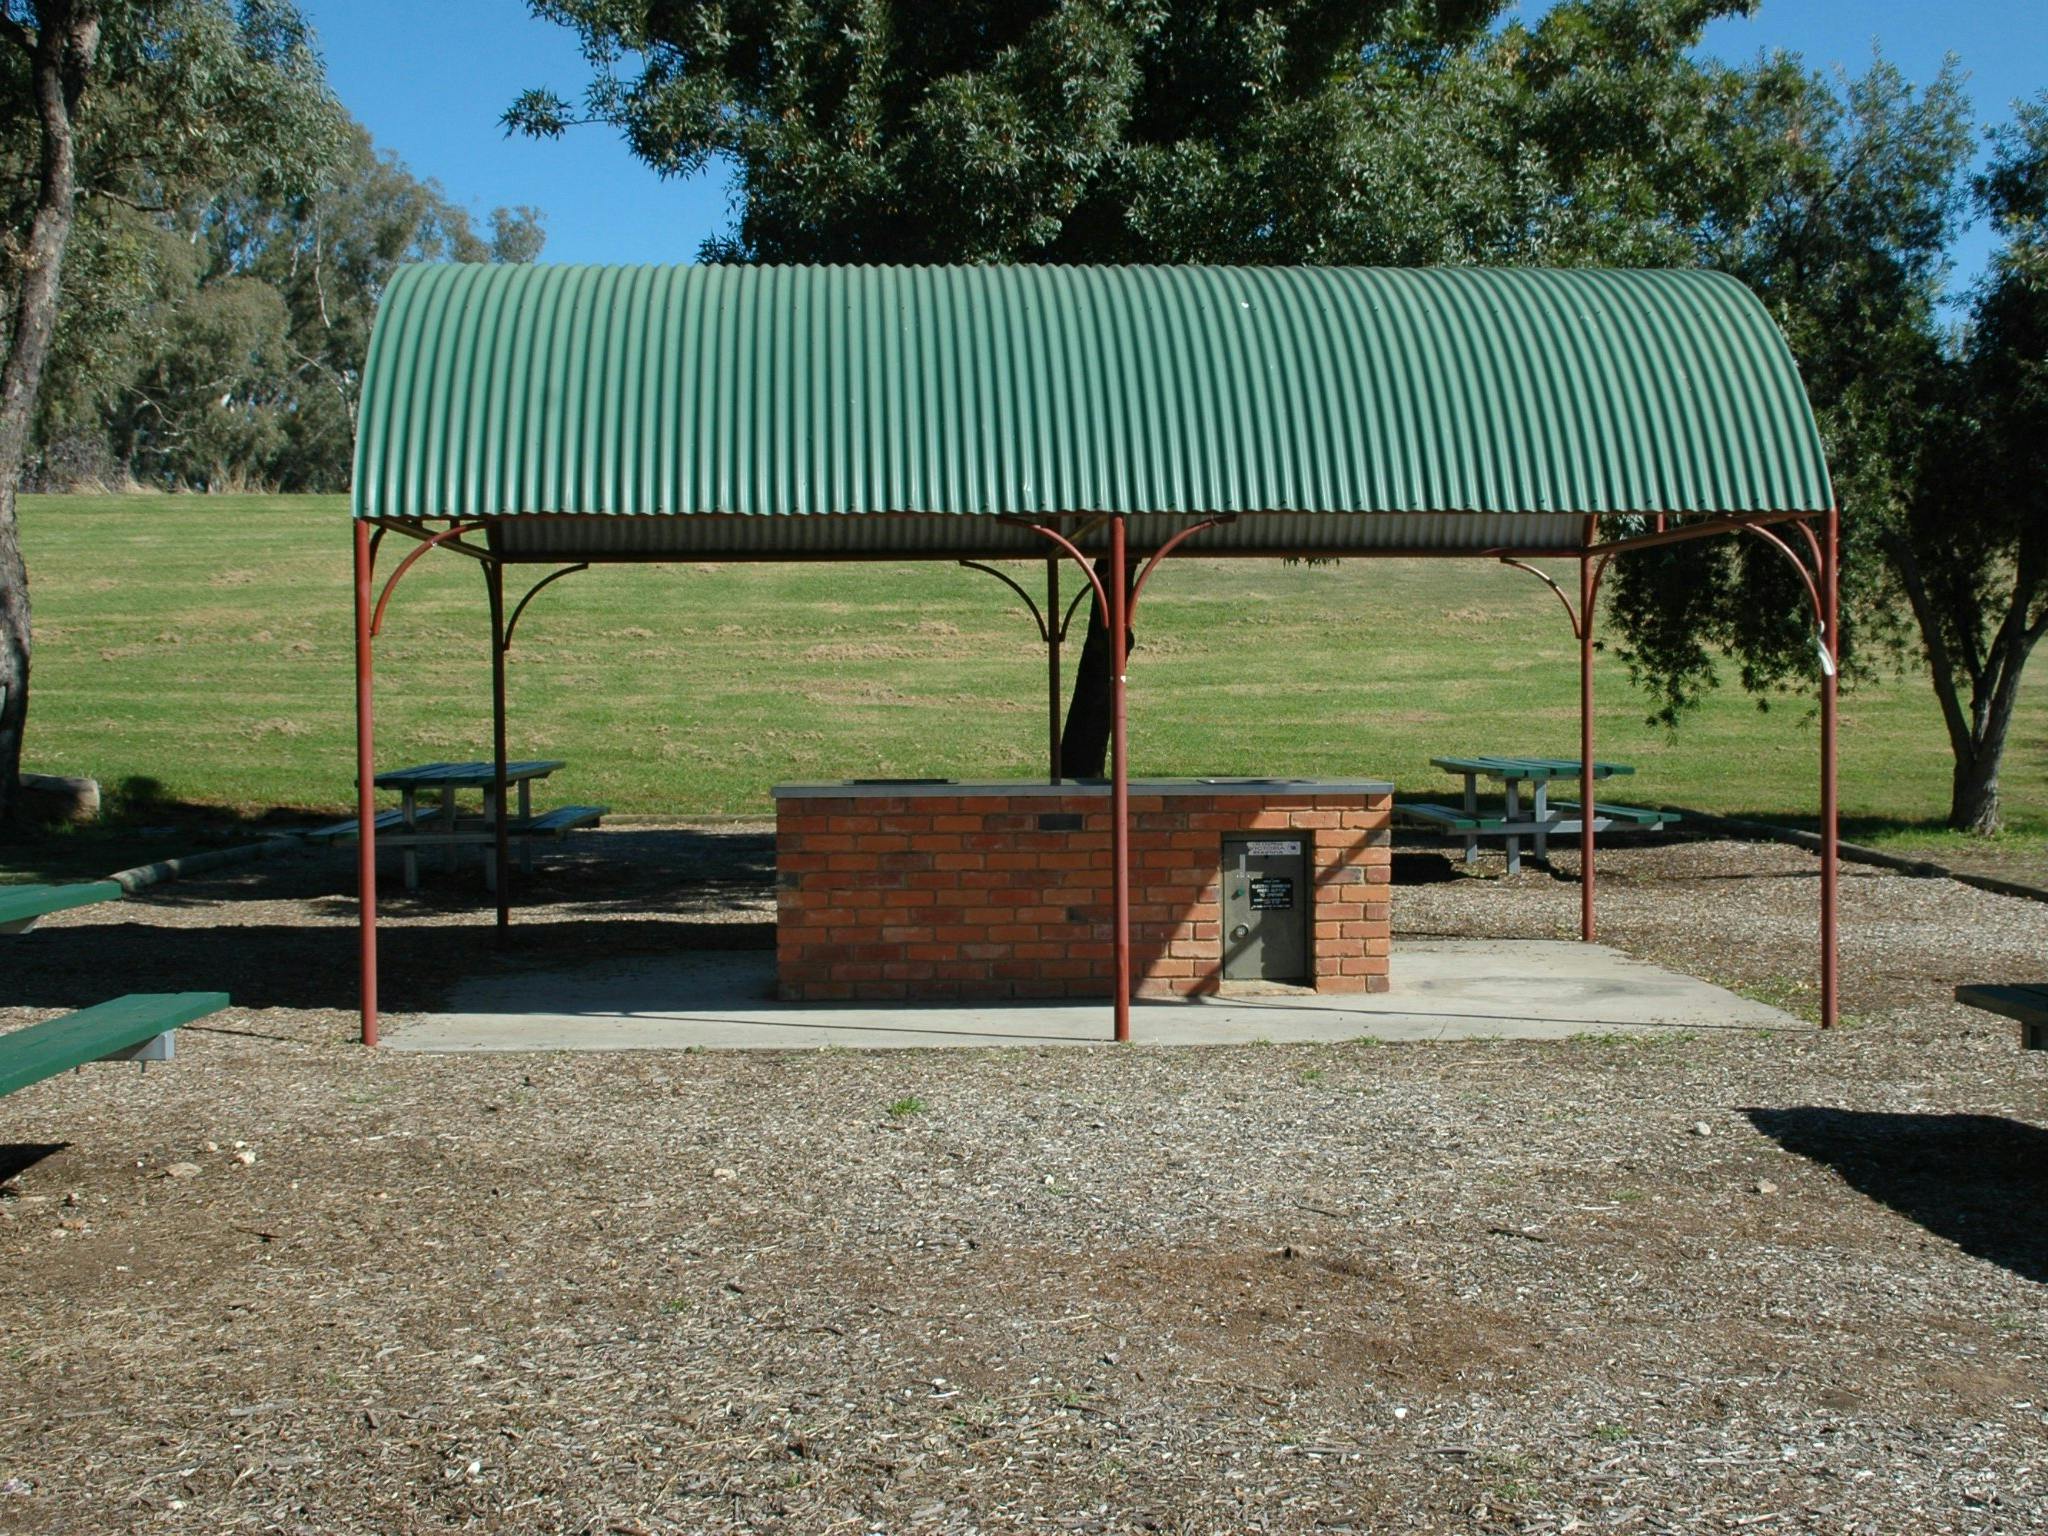 Public BBQ which people can use at the Rutherglen Apex Park